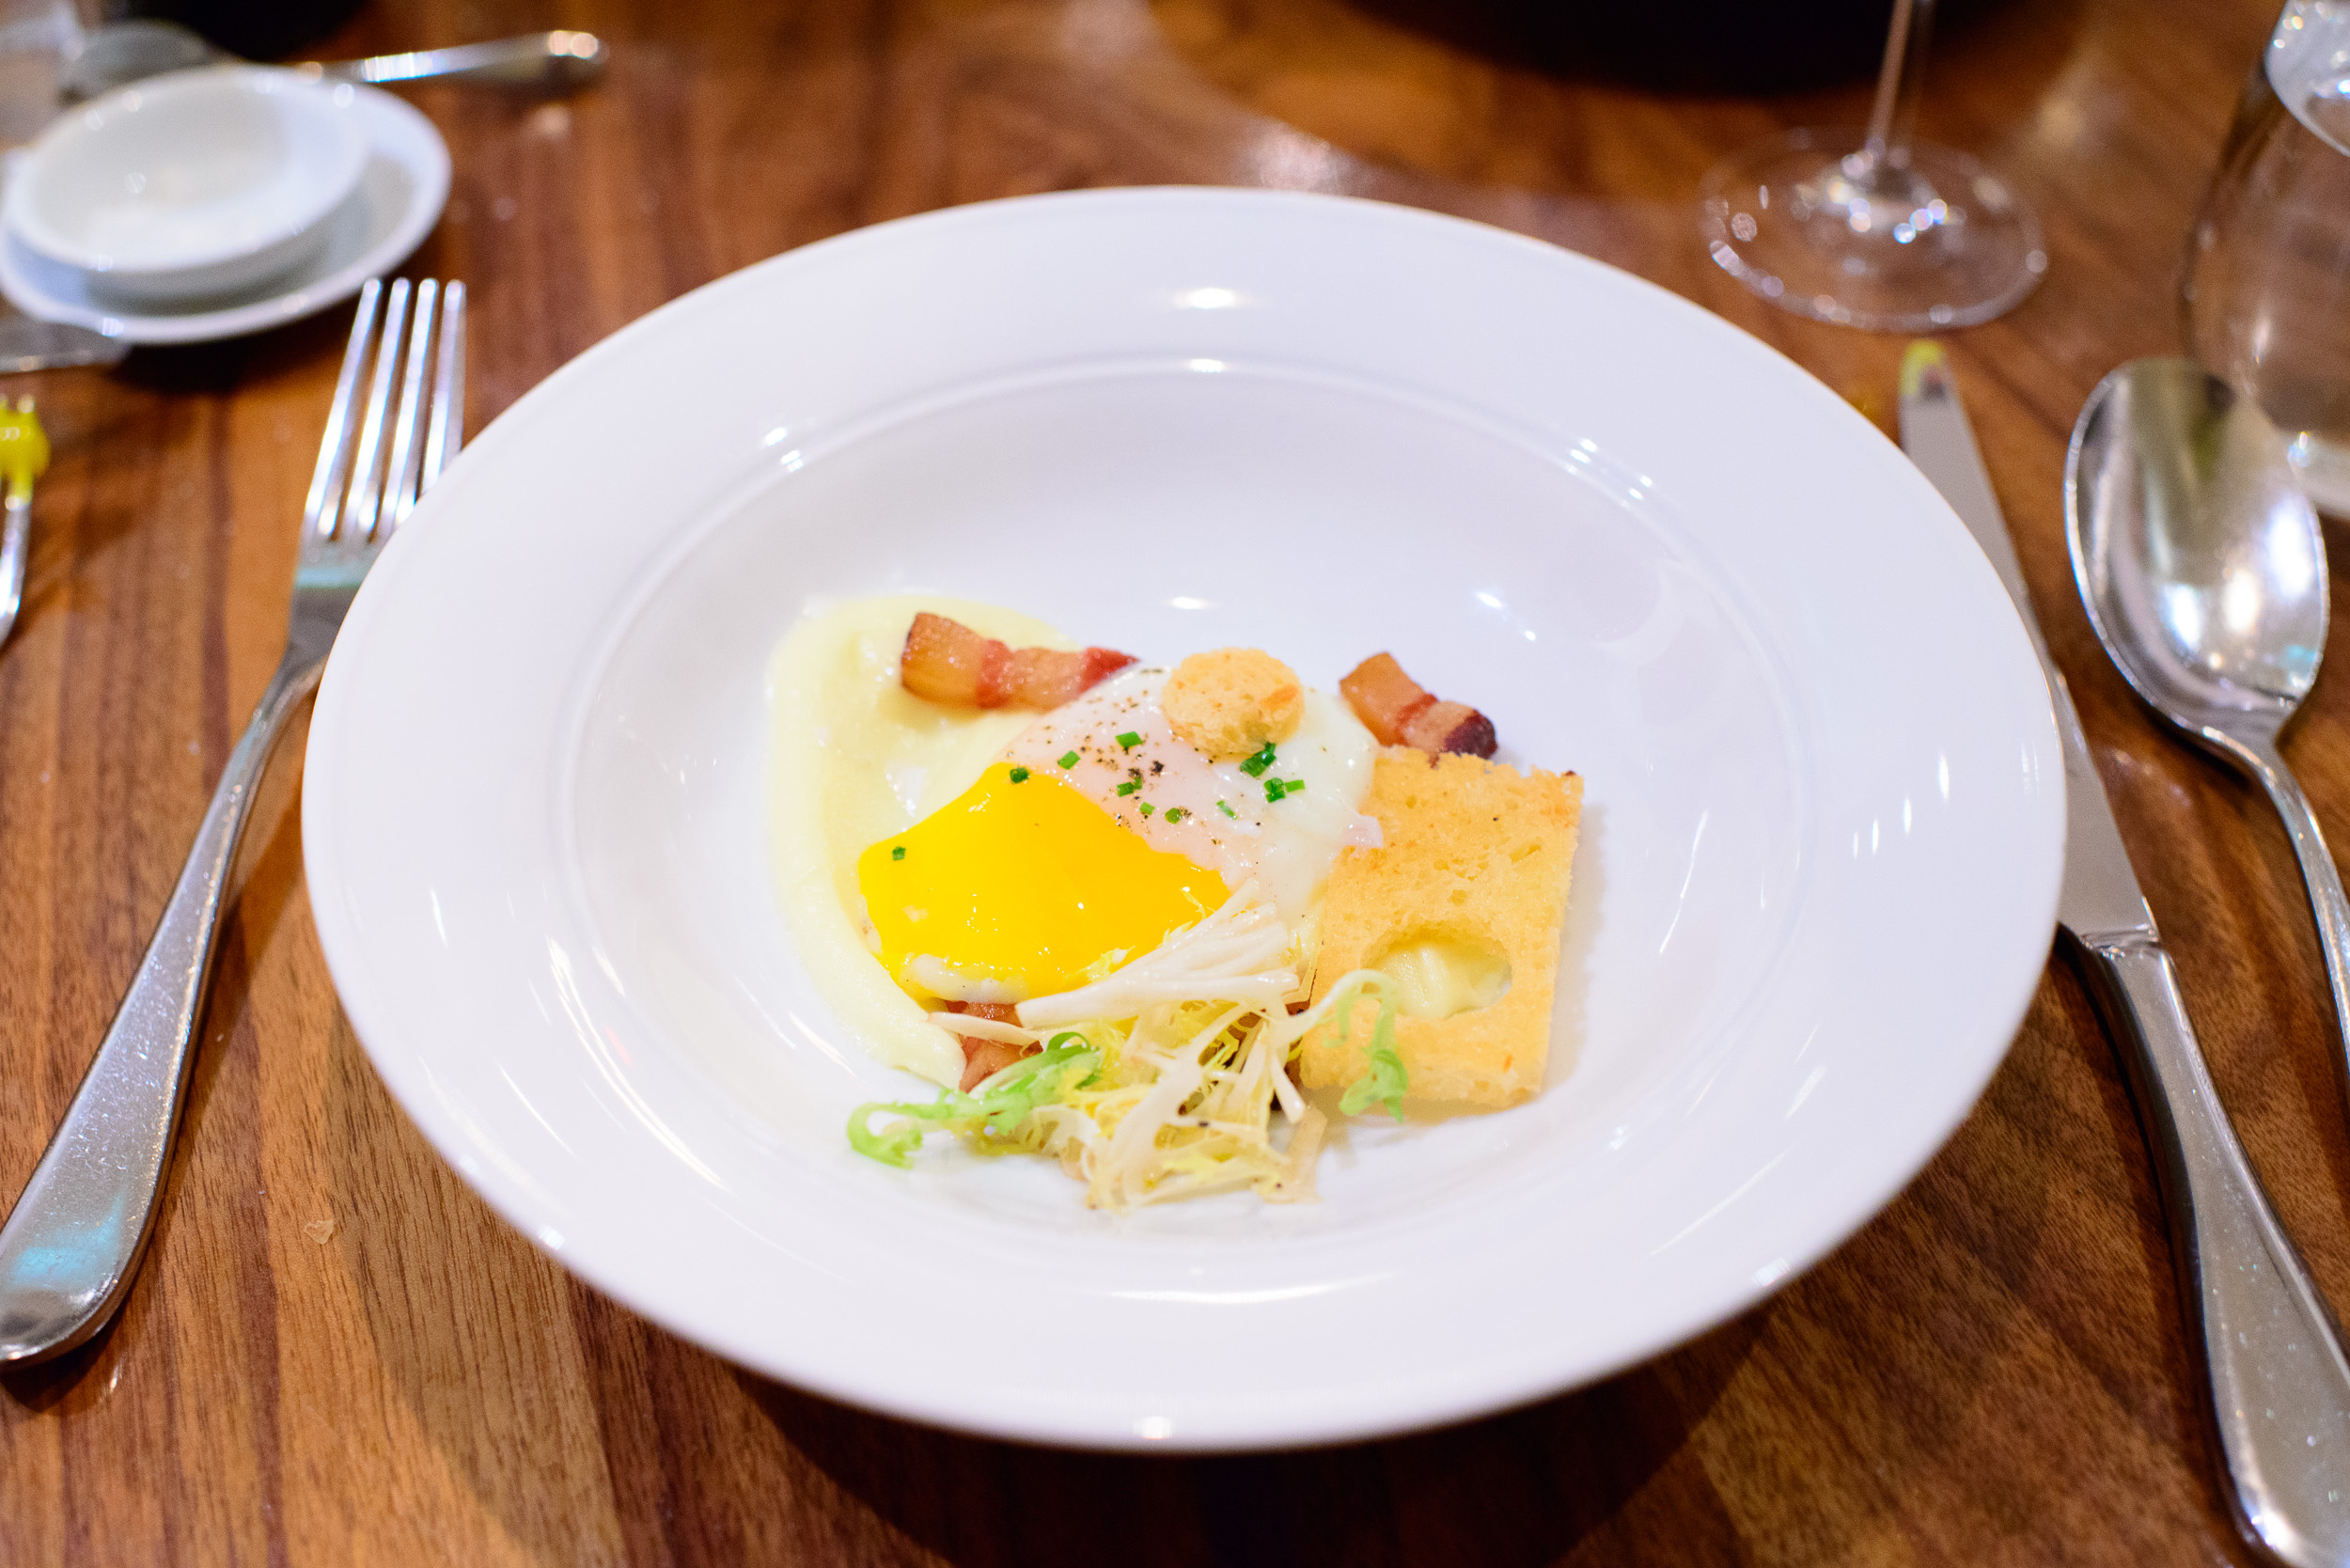 "Uovo" - slow-cooked egg, house-made pancetta, soft potato and c